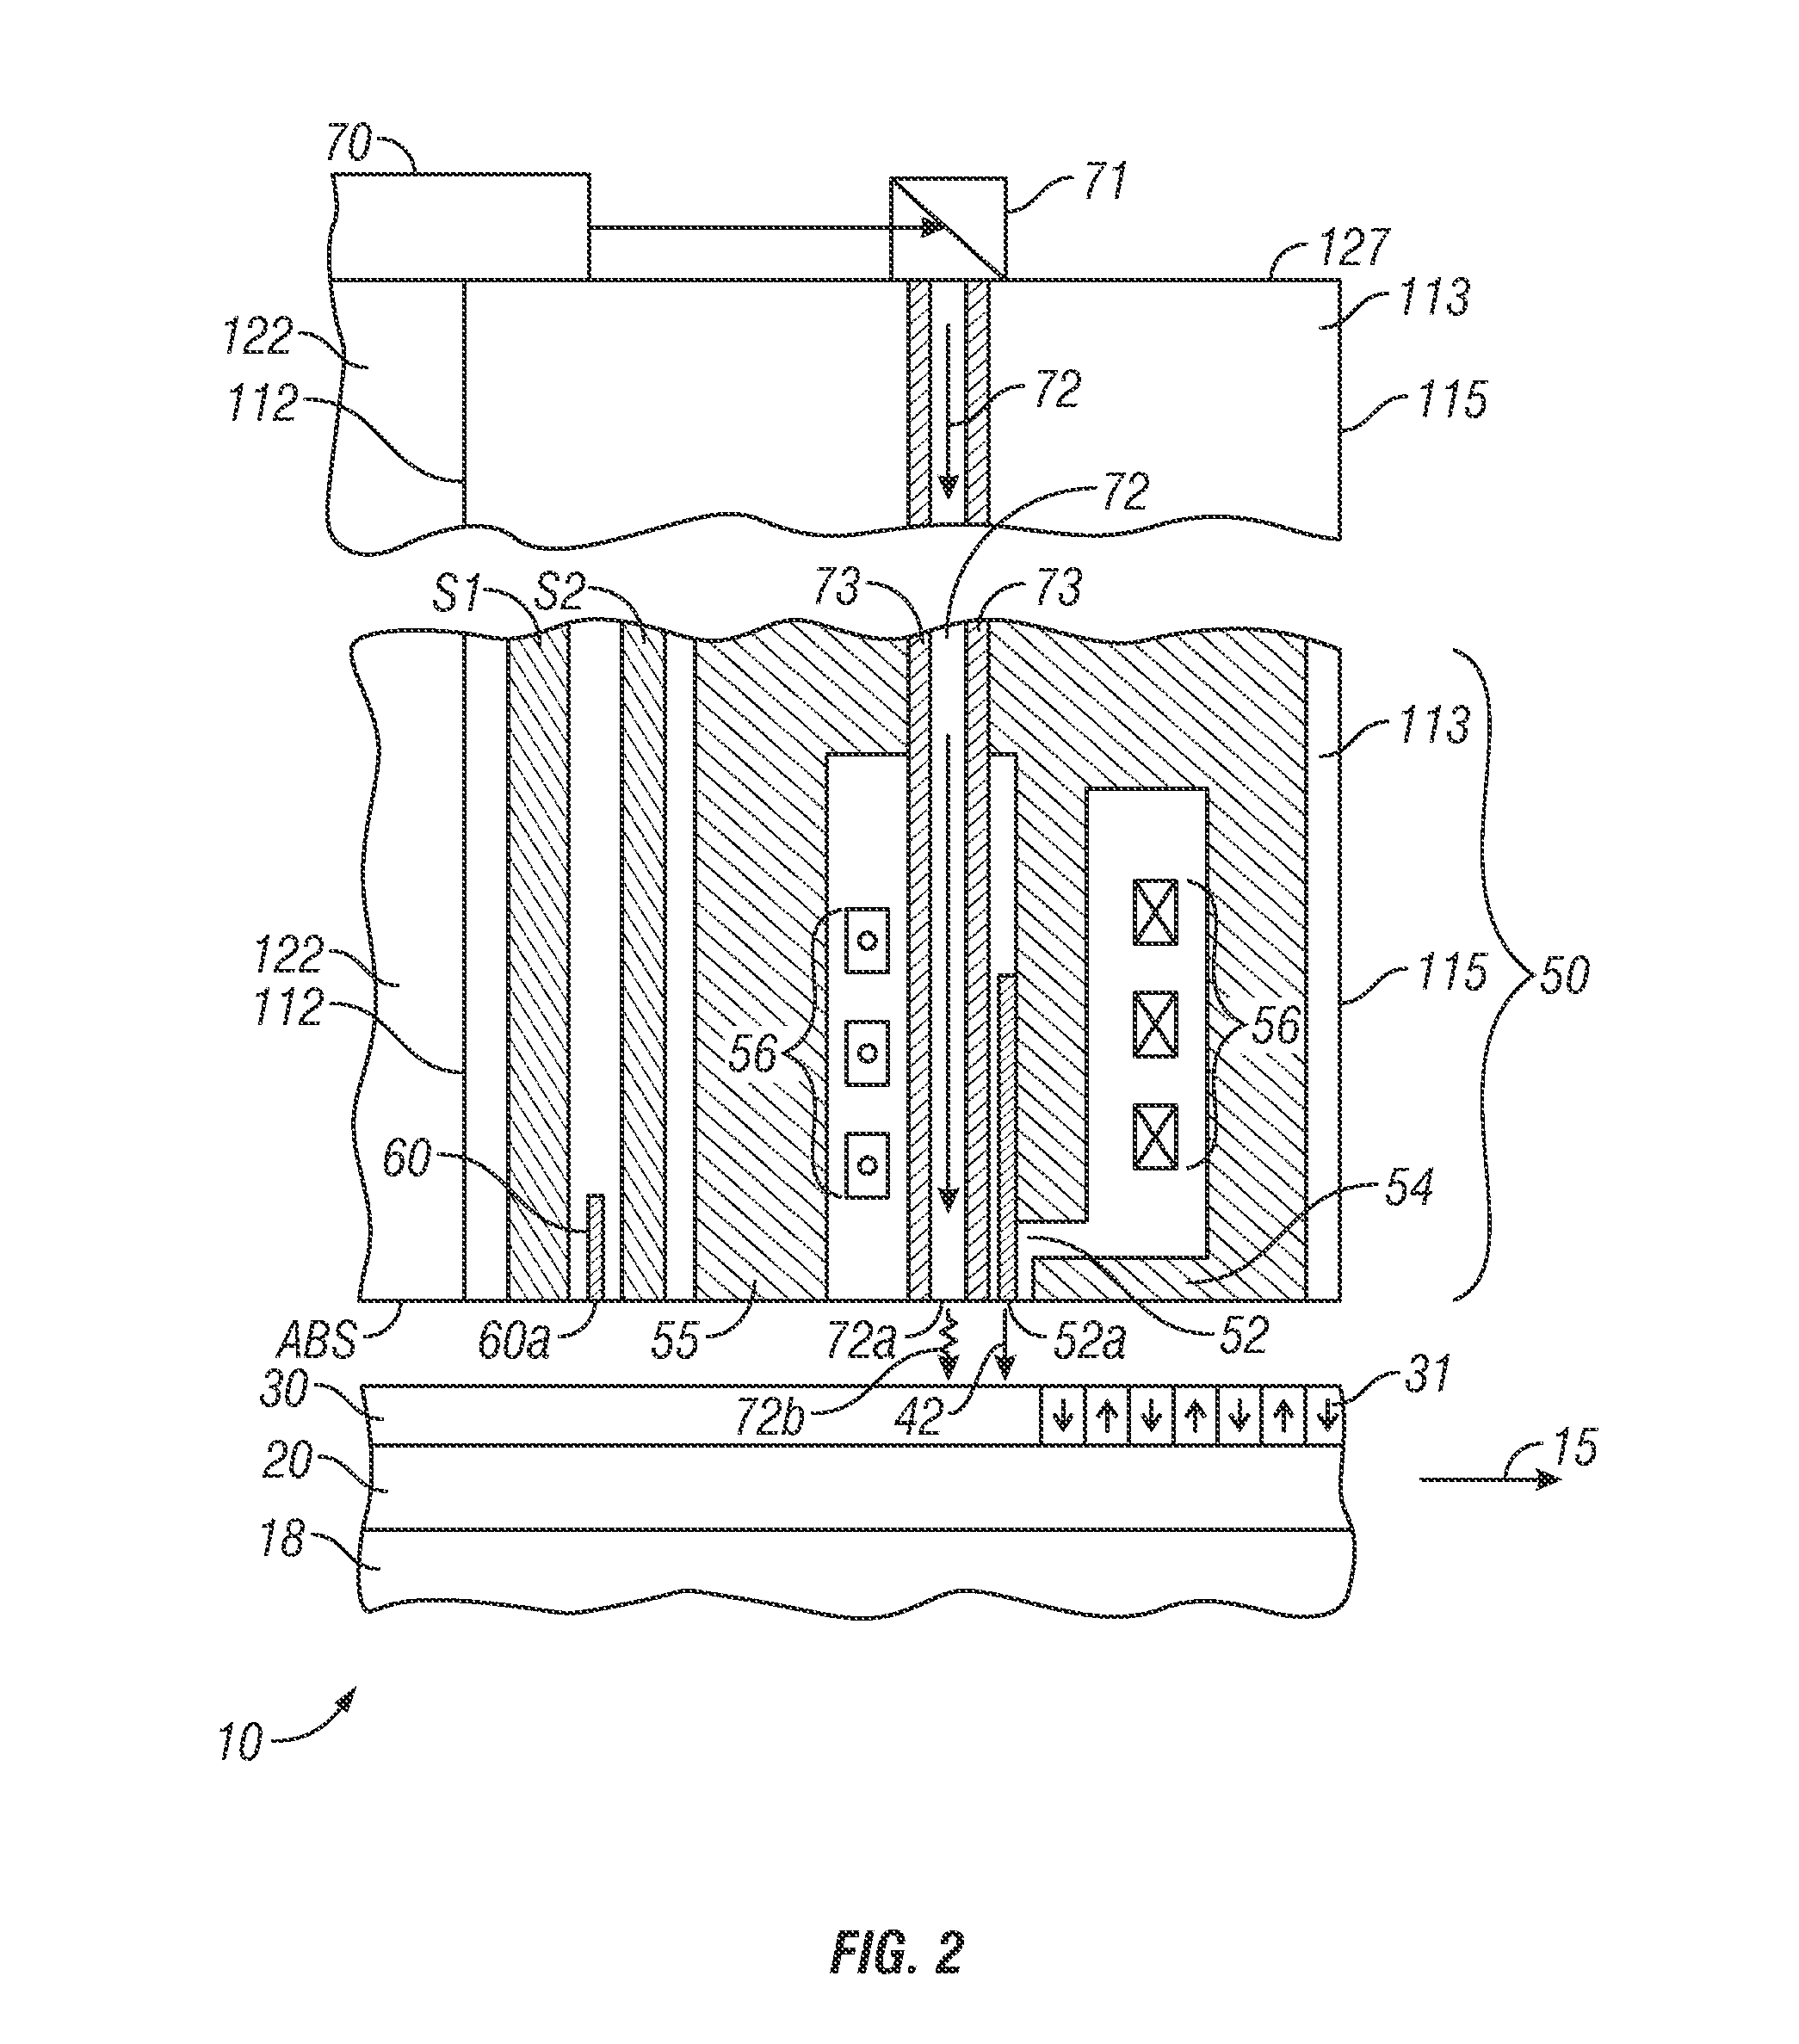 Shingled-writing thermal assistance recording (TAR) disk drive with avoidance of adjacent track erasure from a wide-area heater